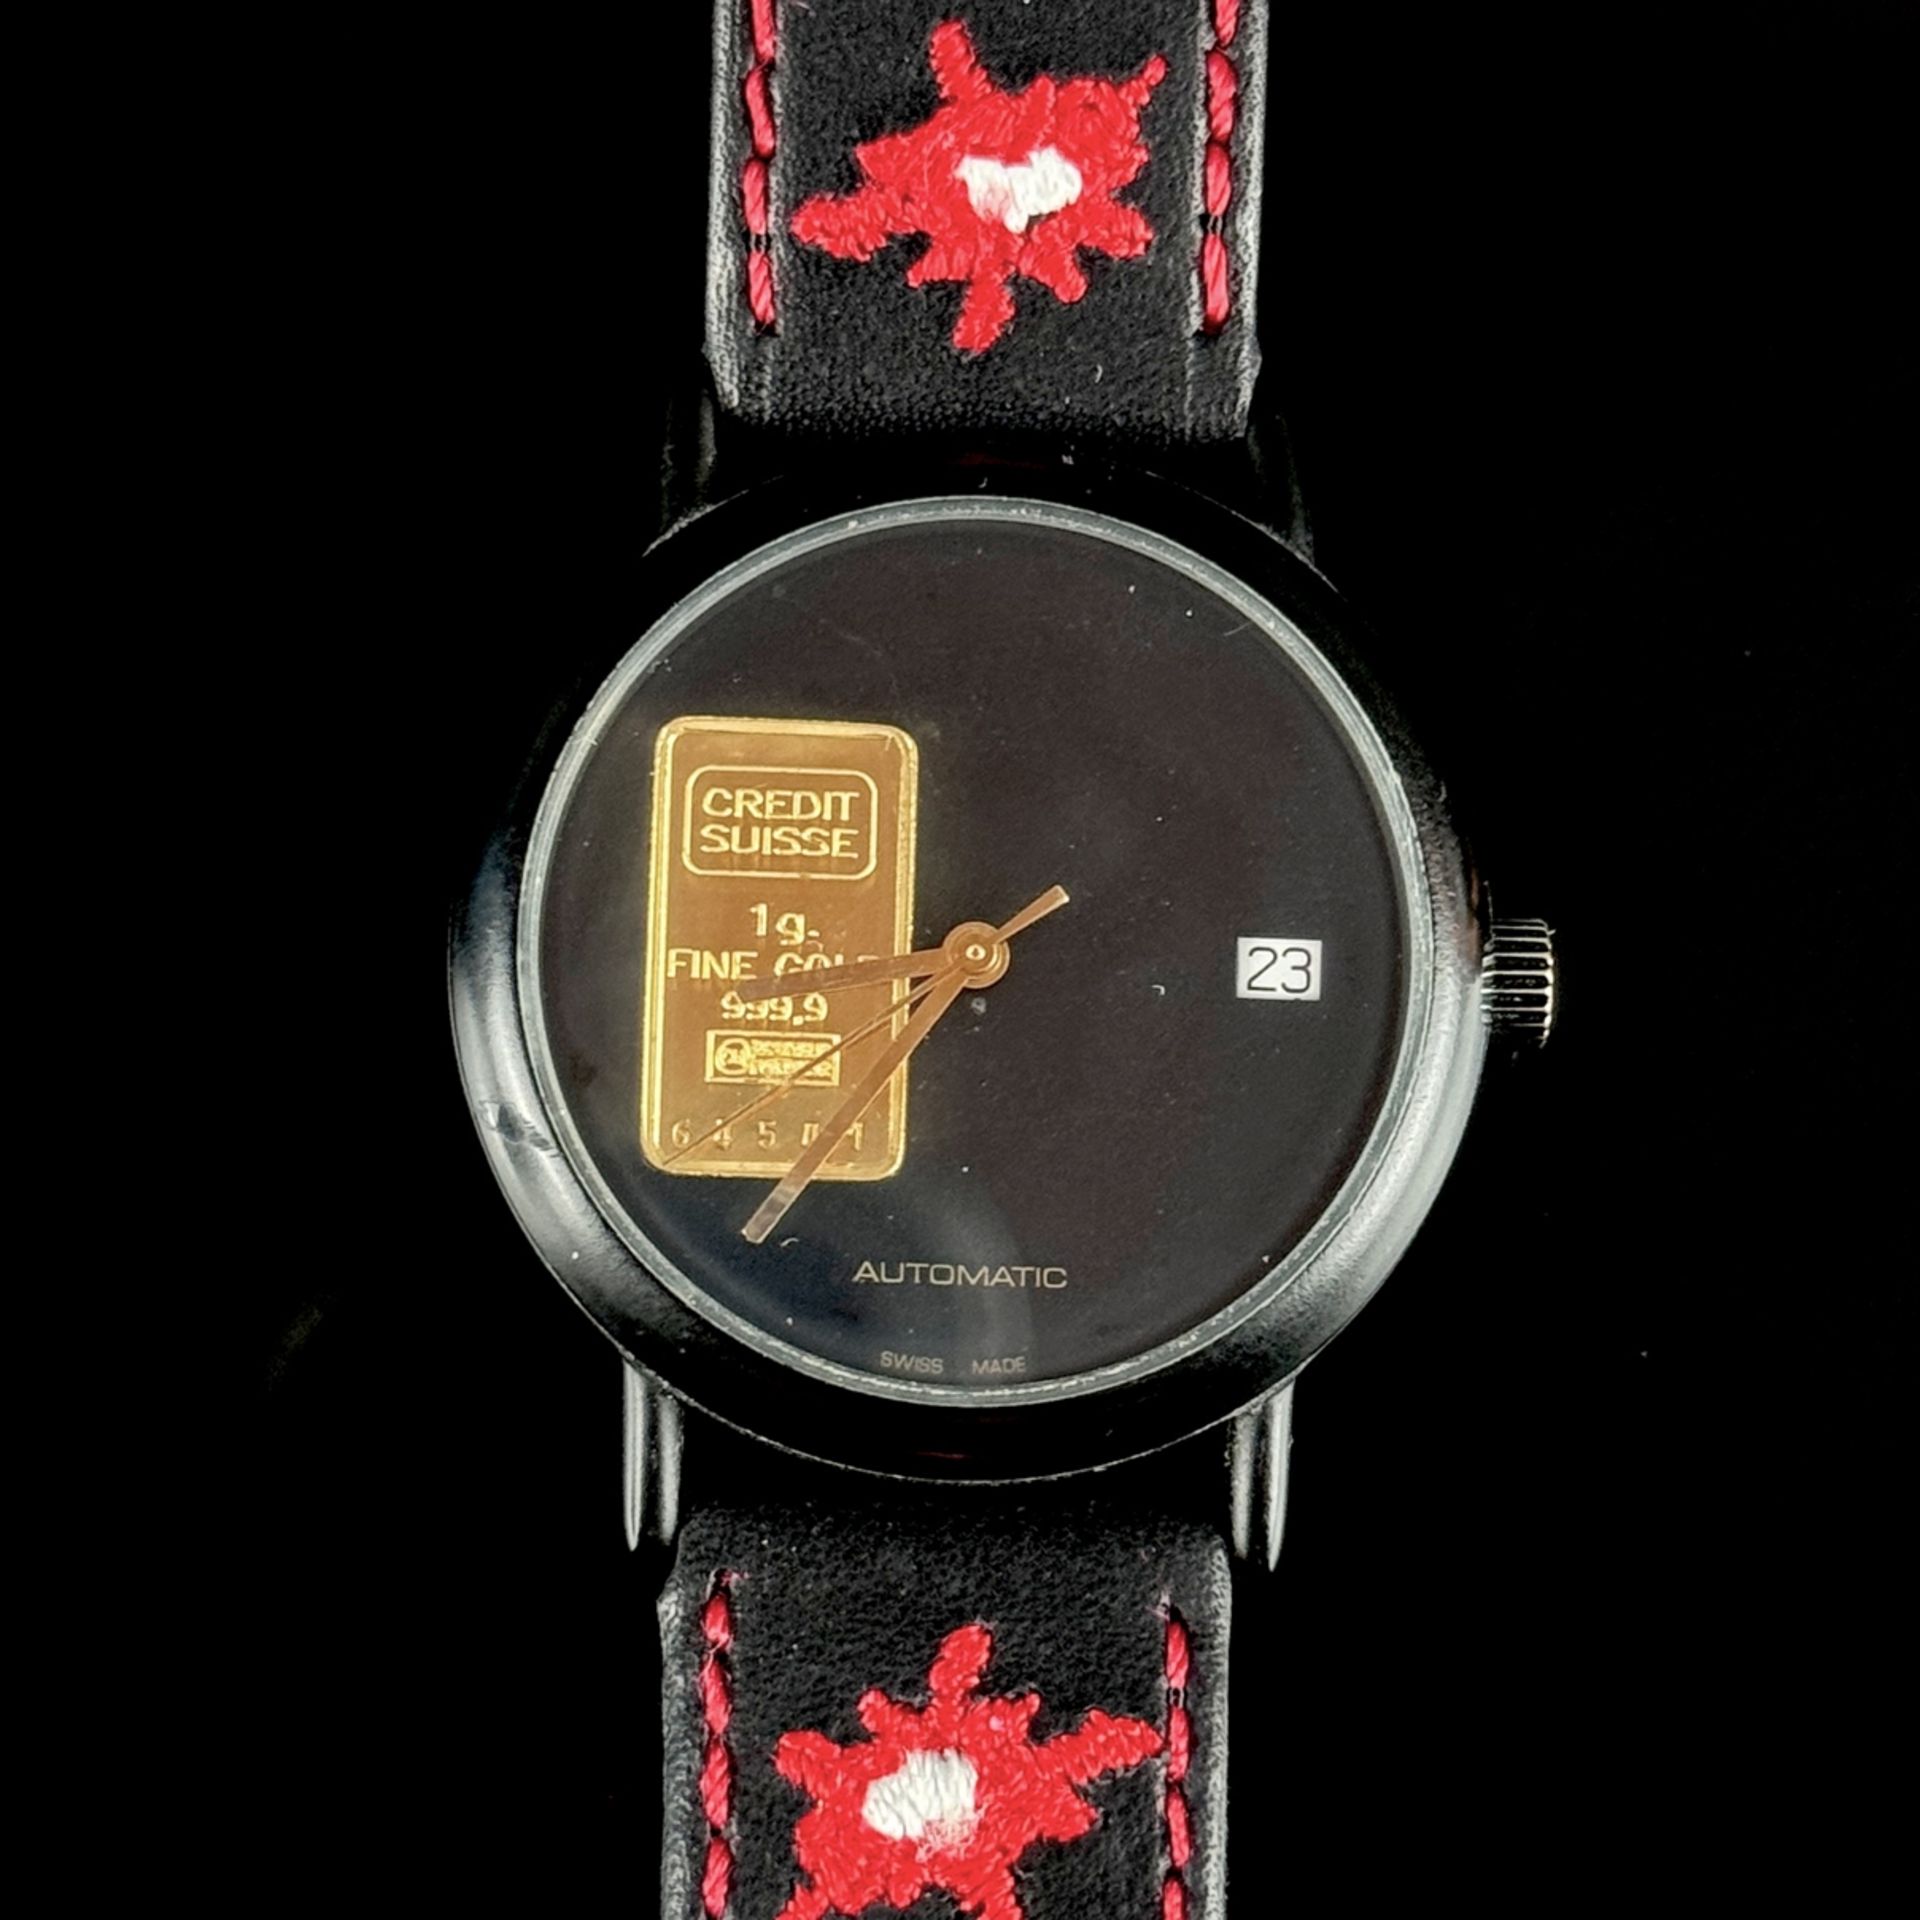 Wristwatch "Unicredit Suisse", automatic, plain black dial, date display at number 3, gold bar 1g f - Image 2 of 3